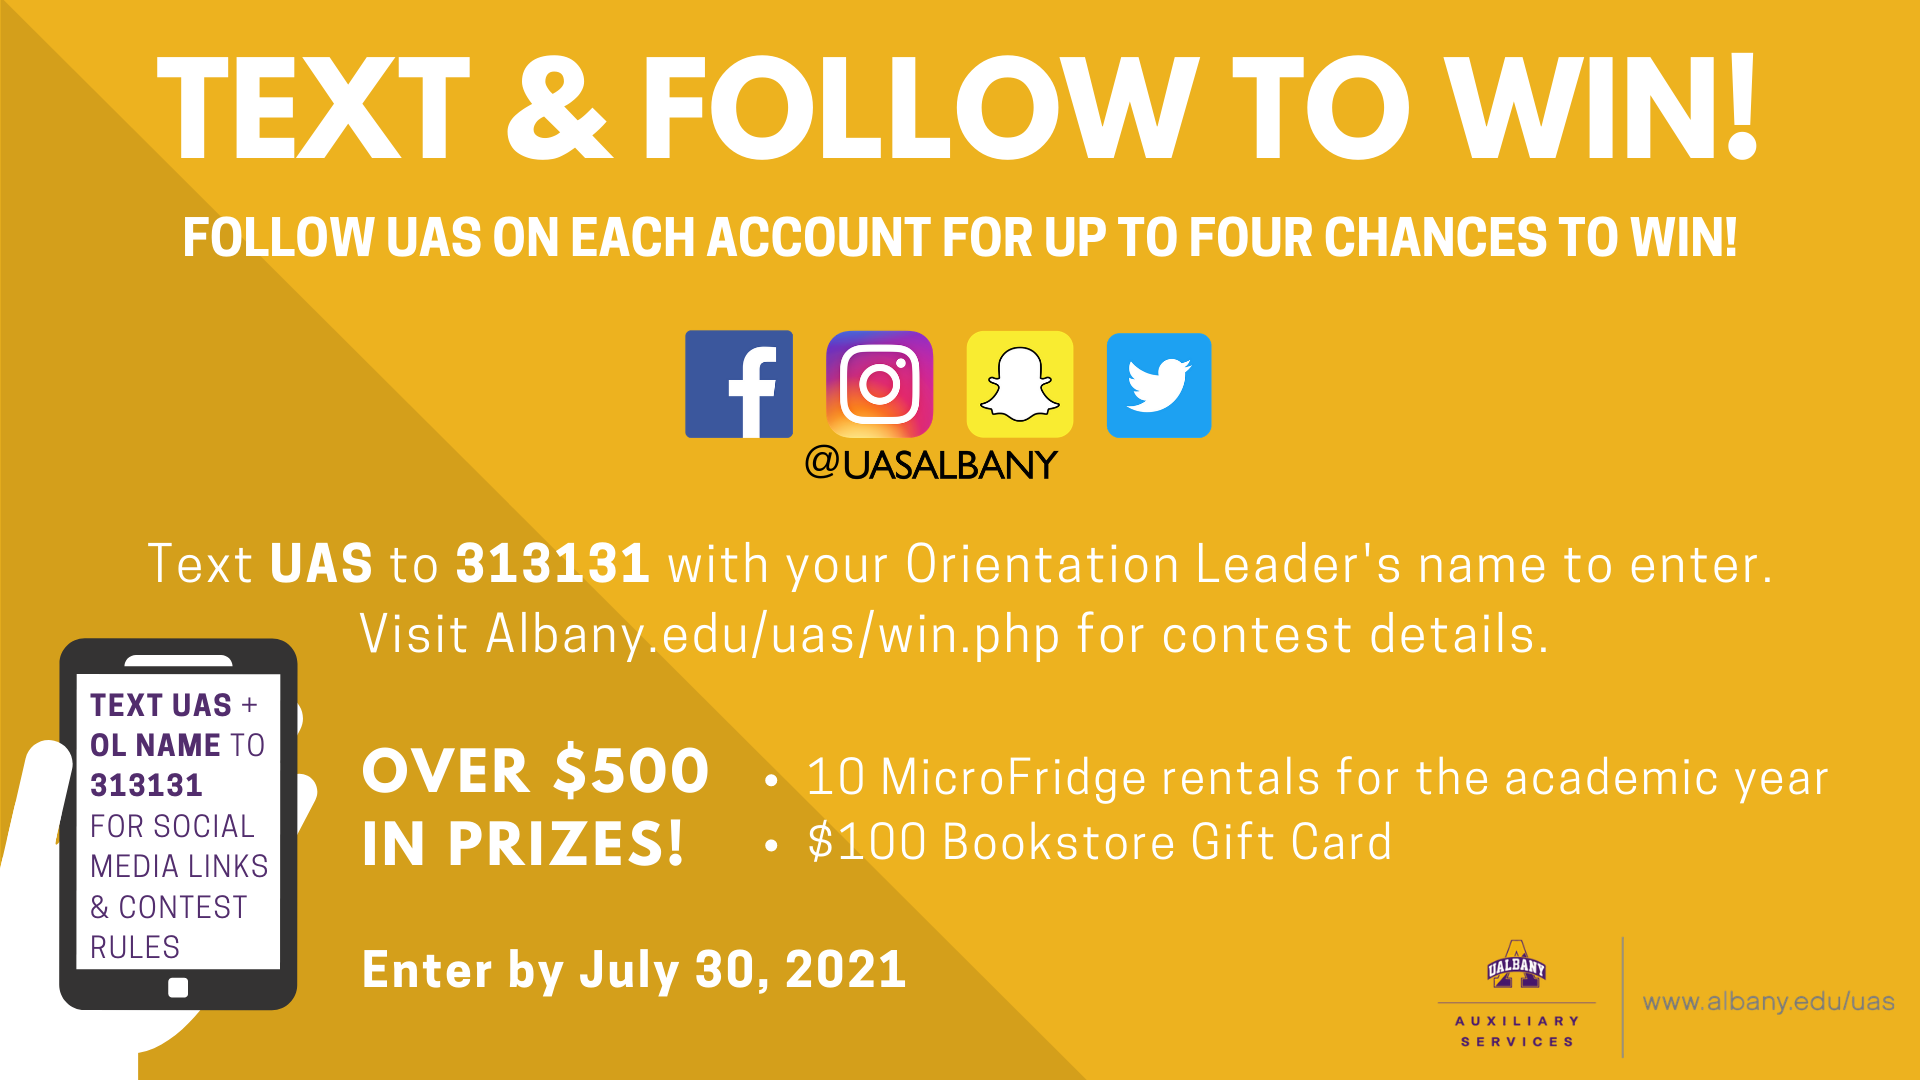 TEXT & FOLLOW TO WIN! FOLLOW UAS ON EACH ACCOUNT FOR UP TO FOUR CHANCES TO WIN! Facebook icon, Instagram icon, Snapchat icon, and Twitter icon in a row all @UASALBANY. Text UAS to 313131 with your Orientation Leader's name to enter. Visit Albany.edu/uas/win.php for contest details. OVER $500 IN PRIZES! 10 MicroFridge rentals for the academic year   $100 Bookstore Gift Card. Enter by July 30, 2021. Auxiliary services A logo. Cellphone graphic with the words Text uas + OL Name to 313131 for social media links & contest rules on screen.  